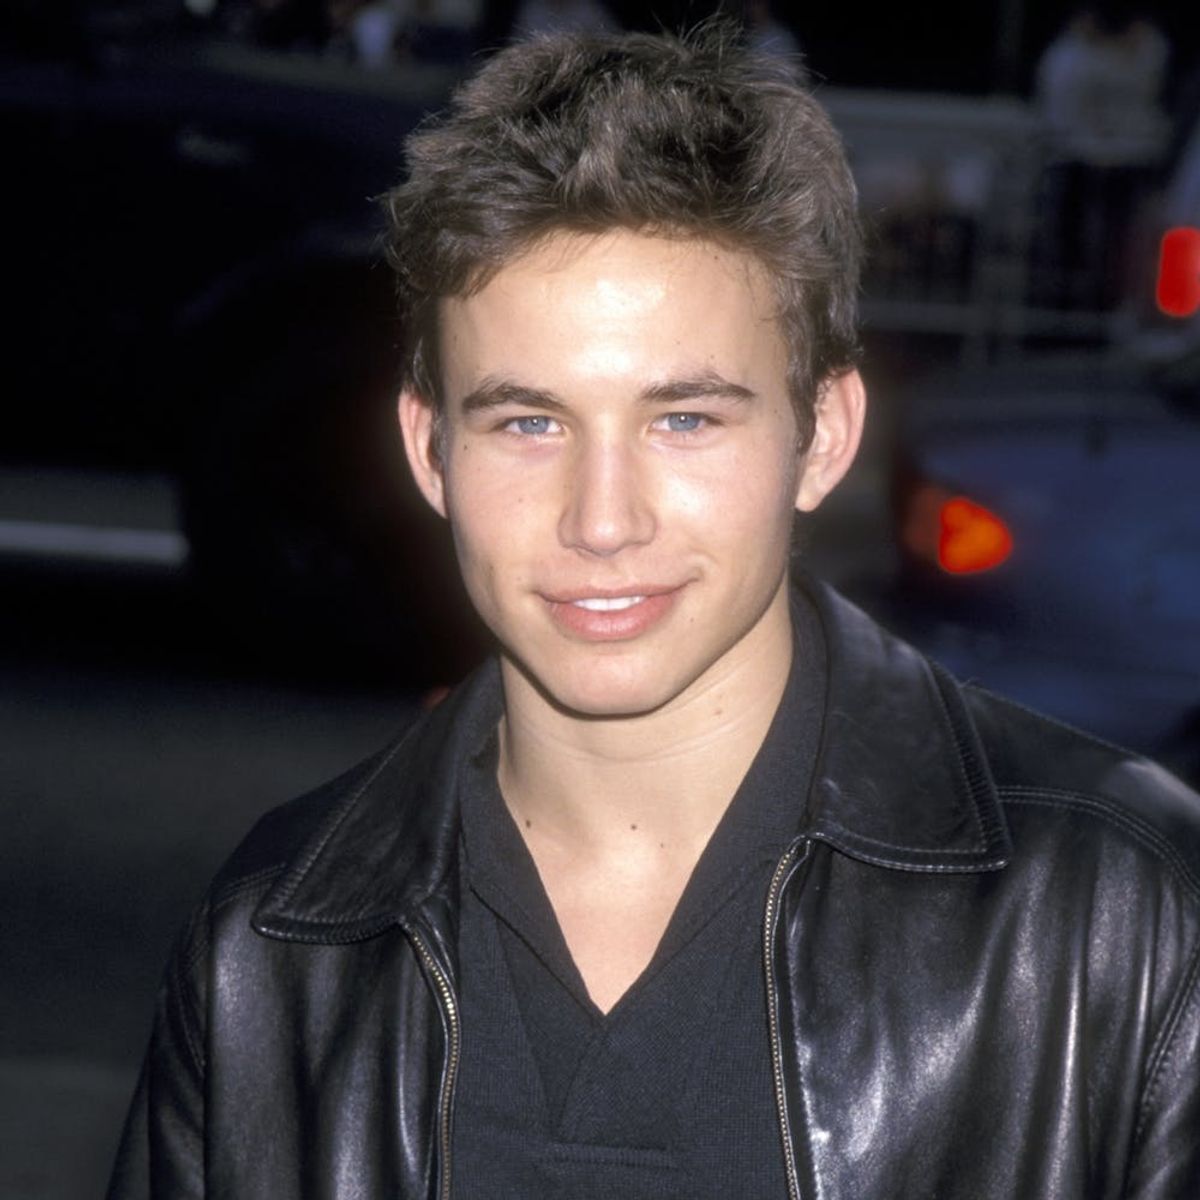 Jonathan Taylor Thomas Almost Played Jason Biggs’ Role in “American Pie”